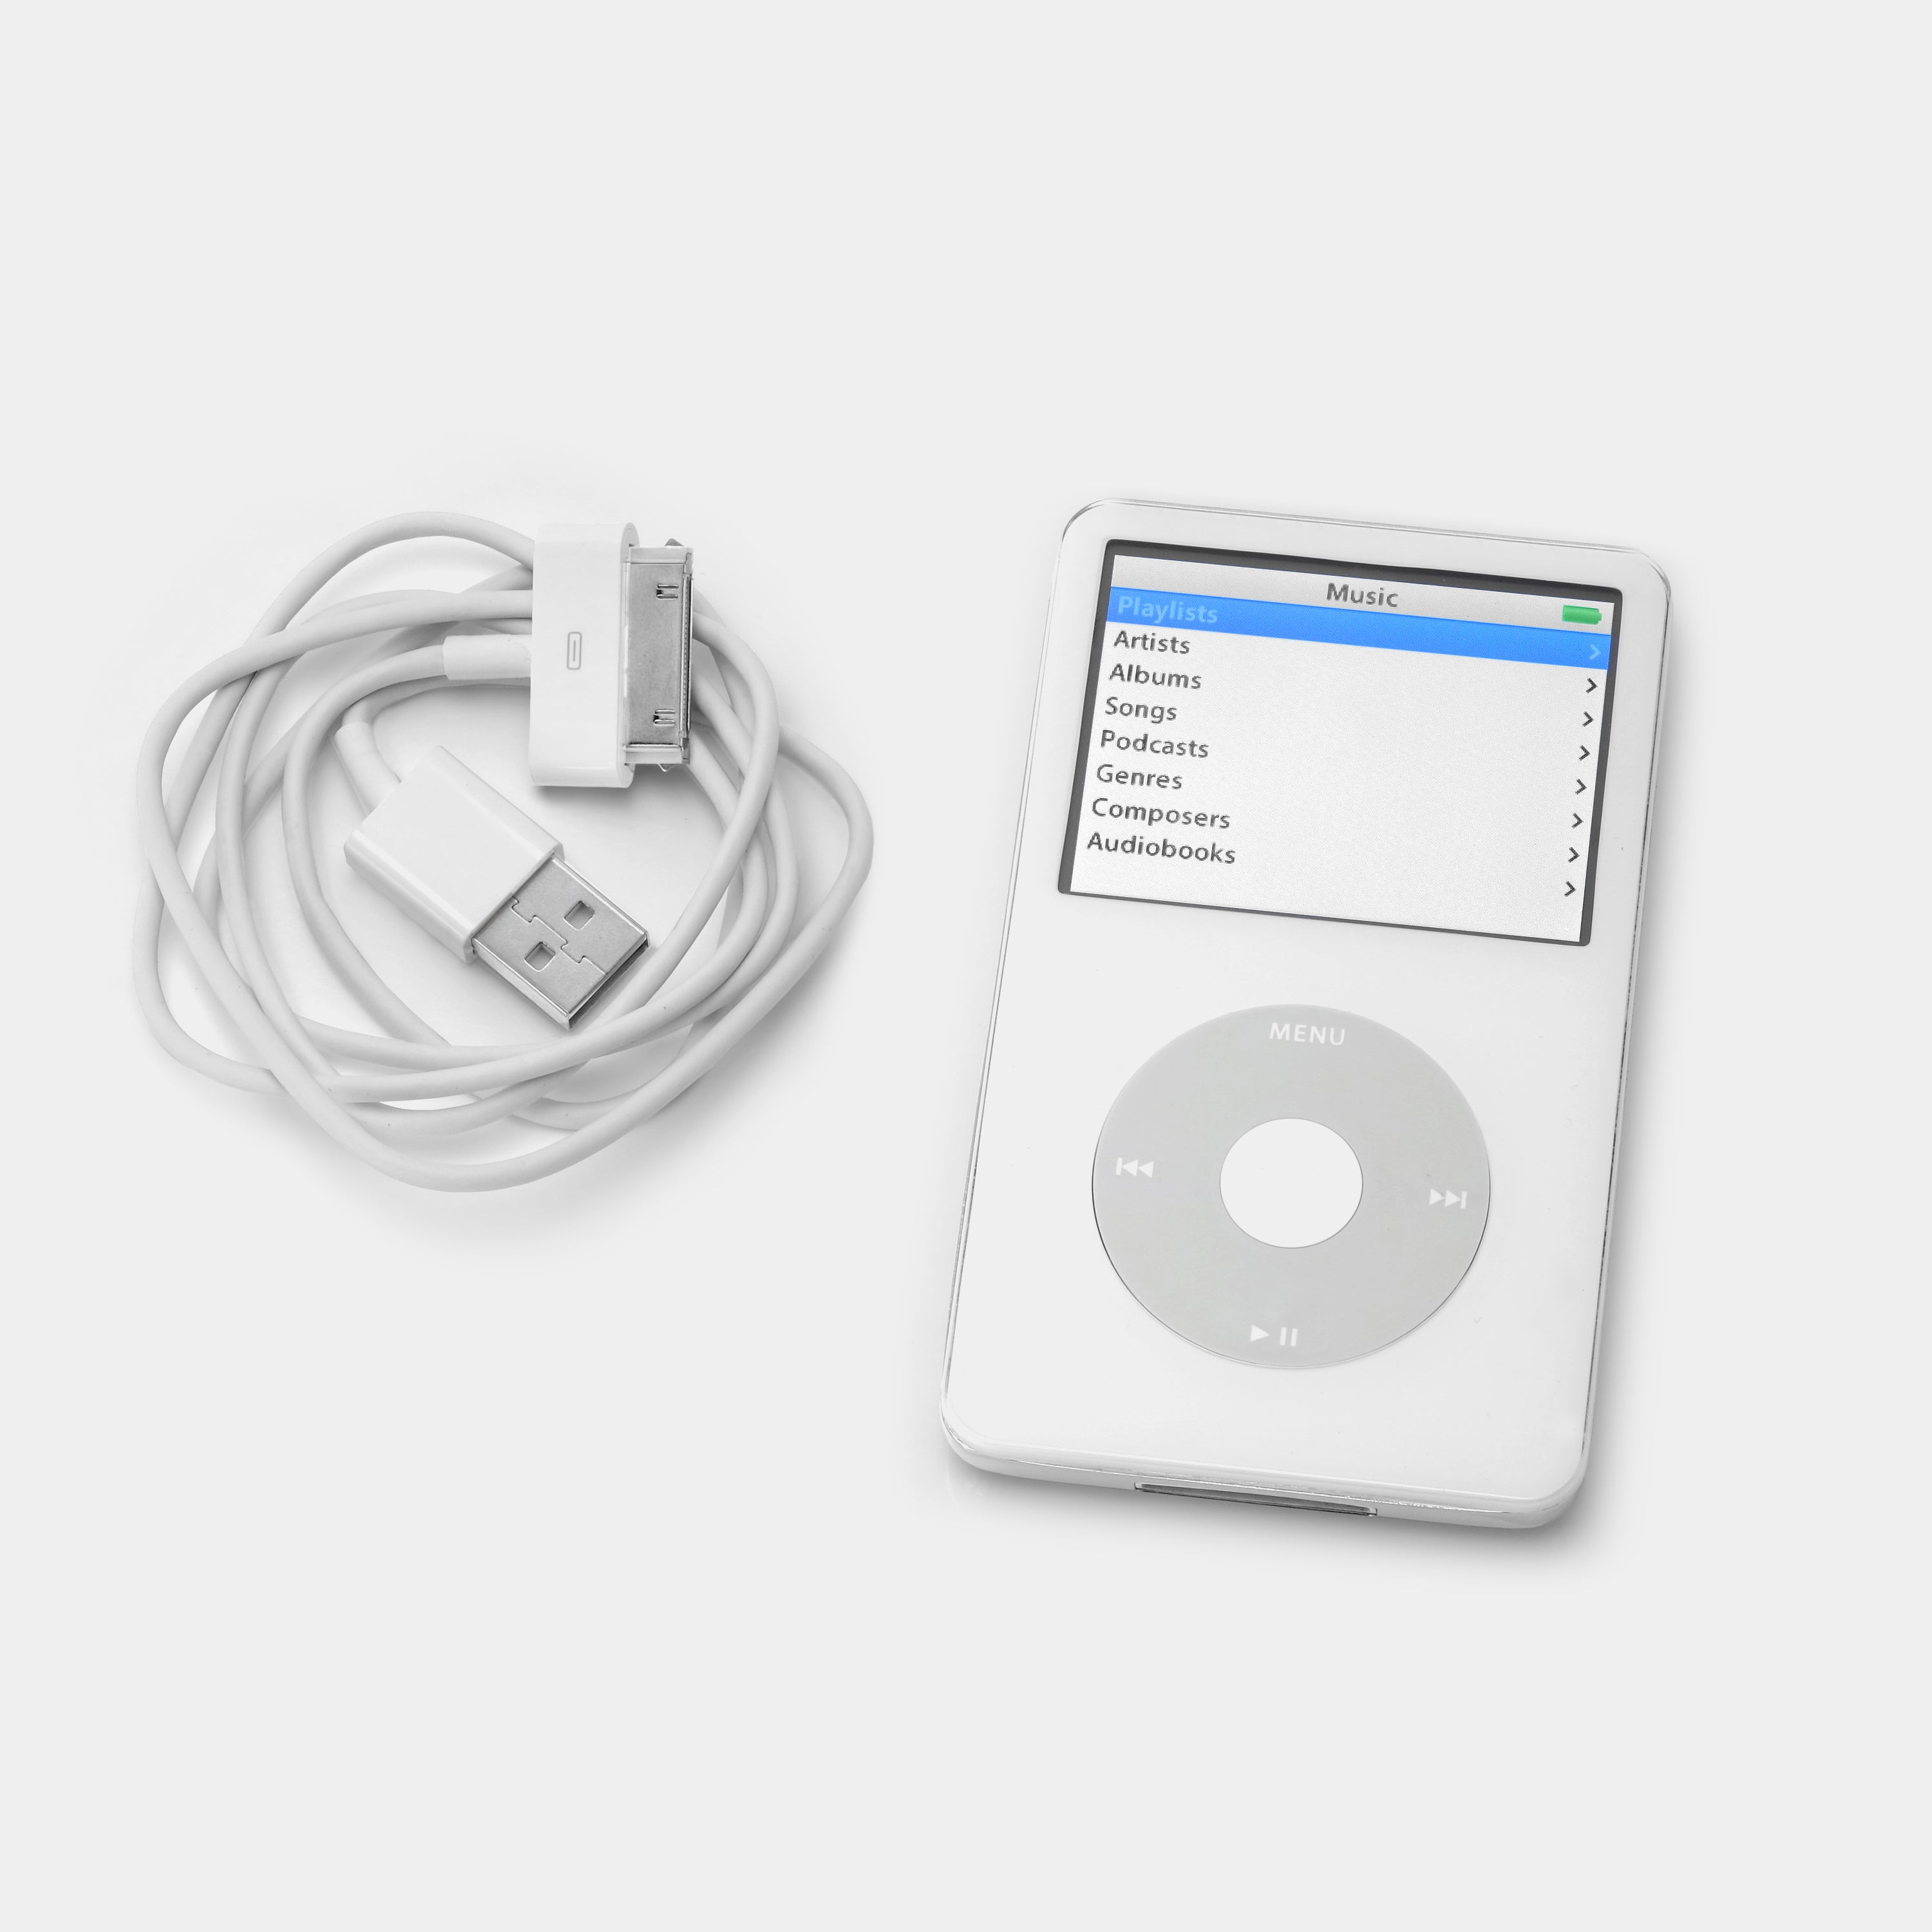 Apple iPod (5th Generation) White MP3 Player